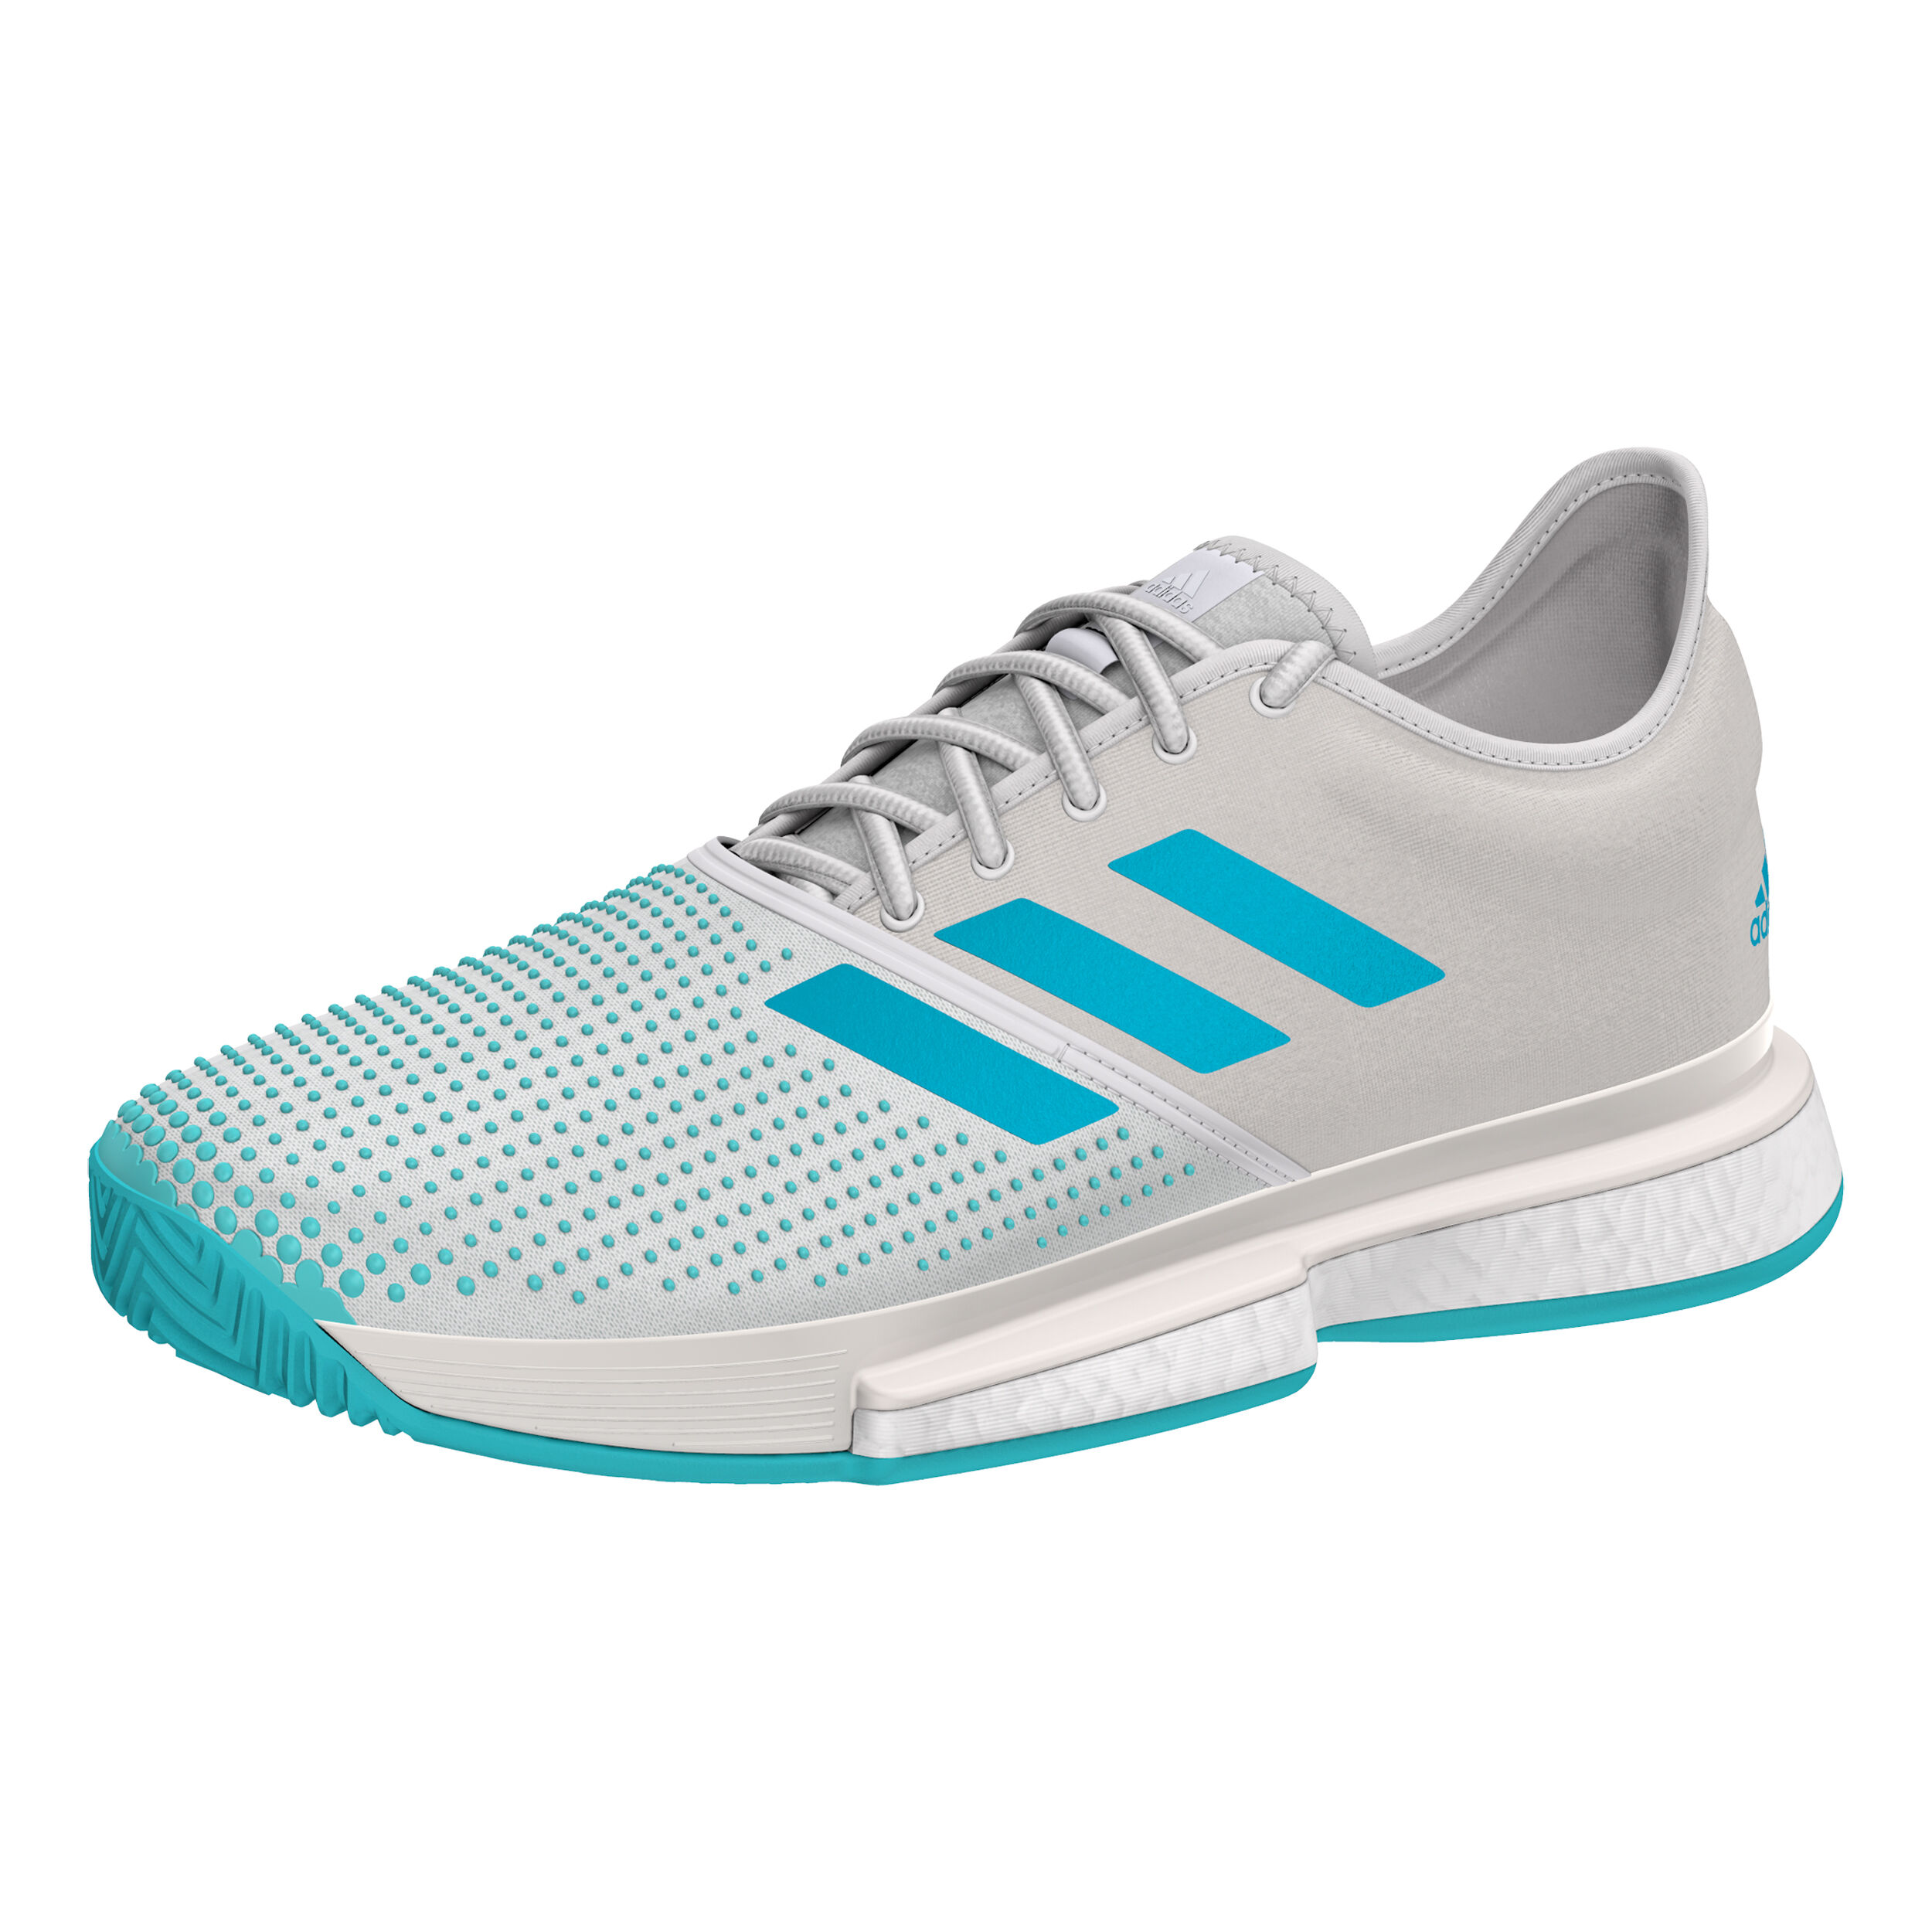 adidas solecourt parley shoes